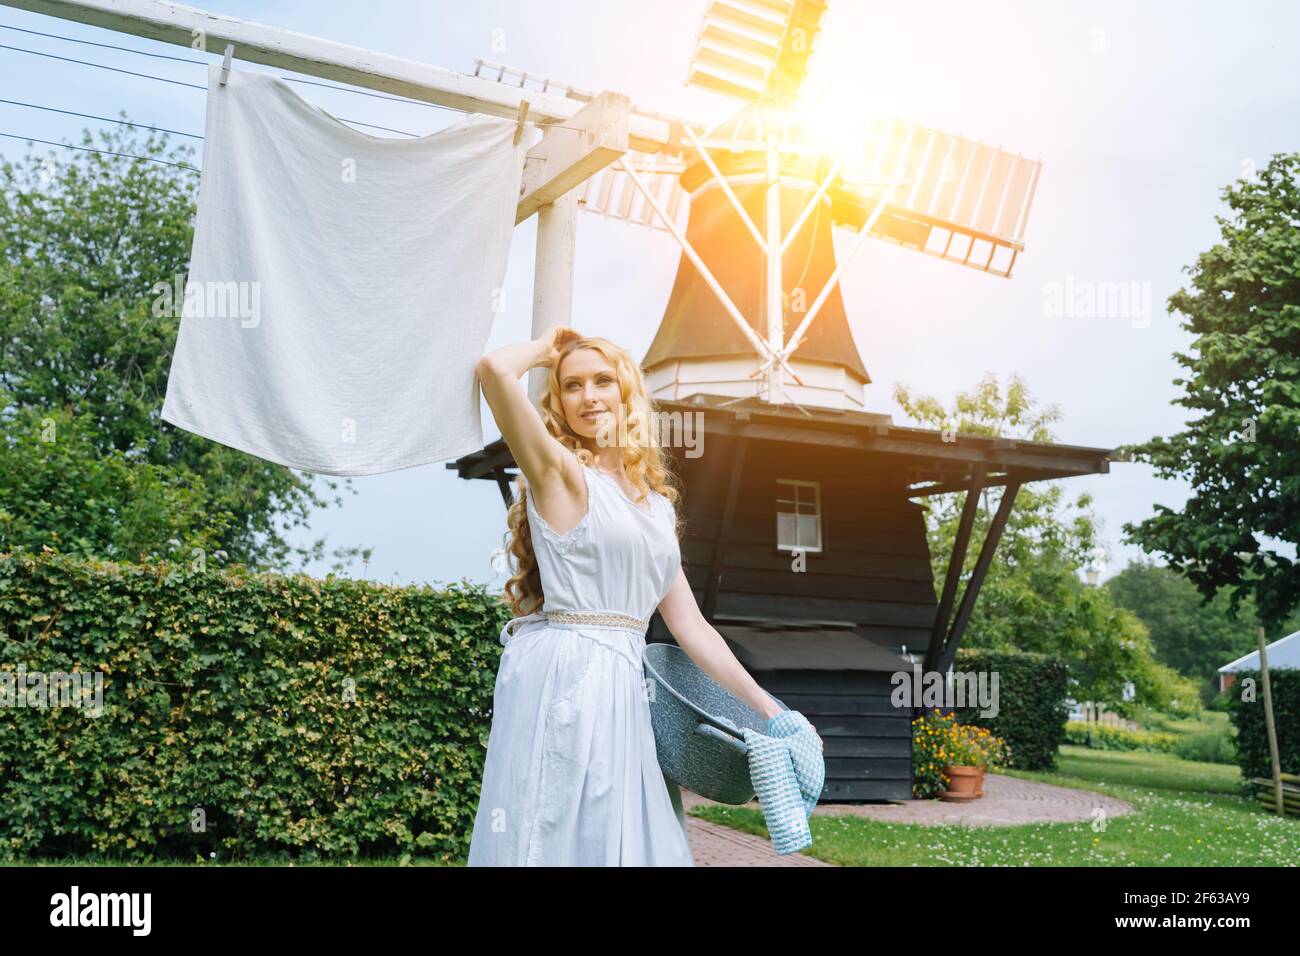 Woman dressed on traditional Dutch dress wooden shoes yellow clogs hanging Clothes on clothesline outside. laundry drying outdoor Netherlands windmill background on sun windy day. retro vintage style  Stock Photo